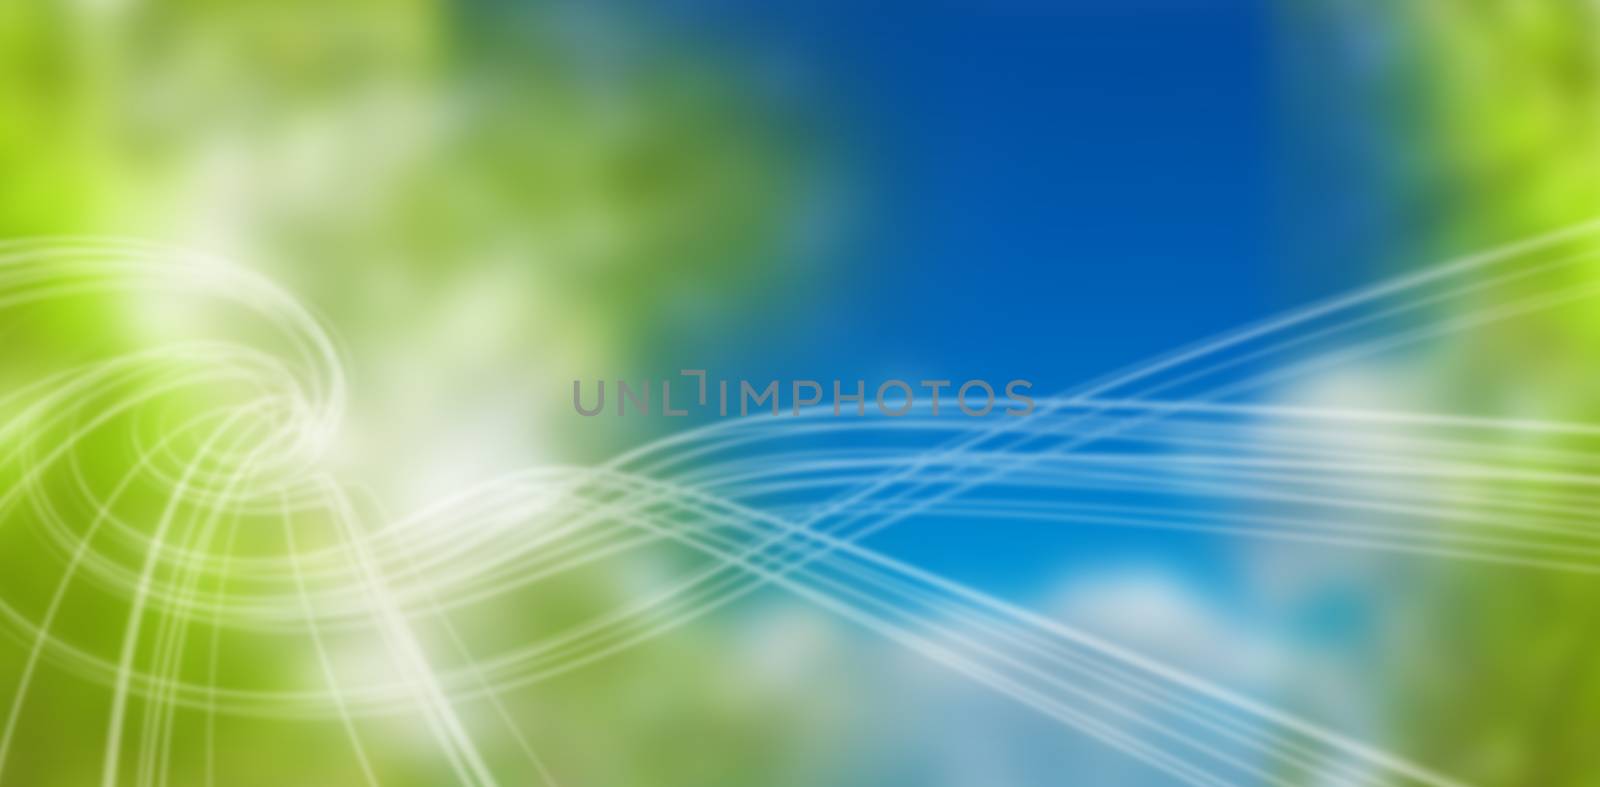 3d Blue background with shiny lines against green leaves